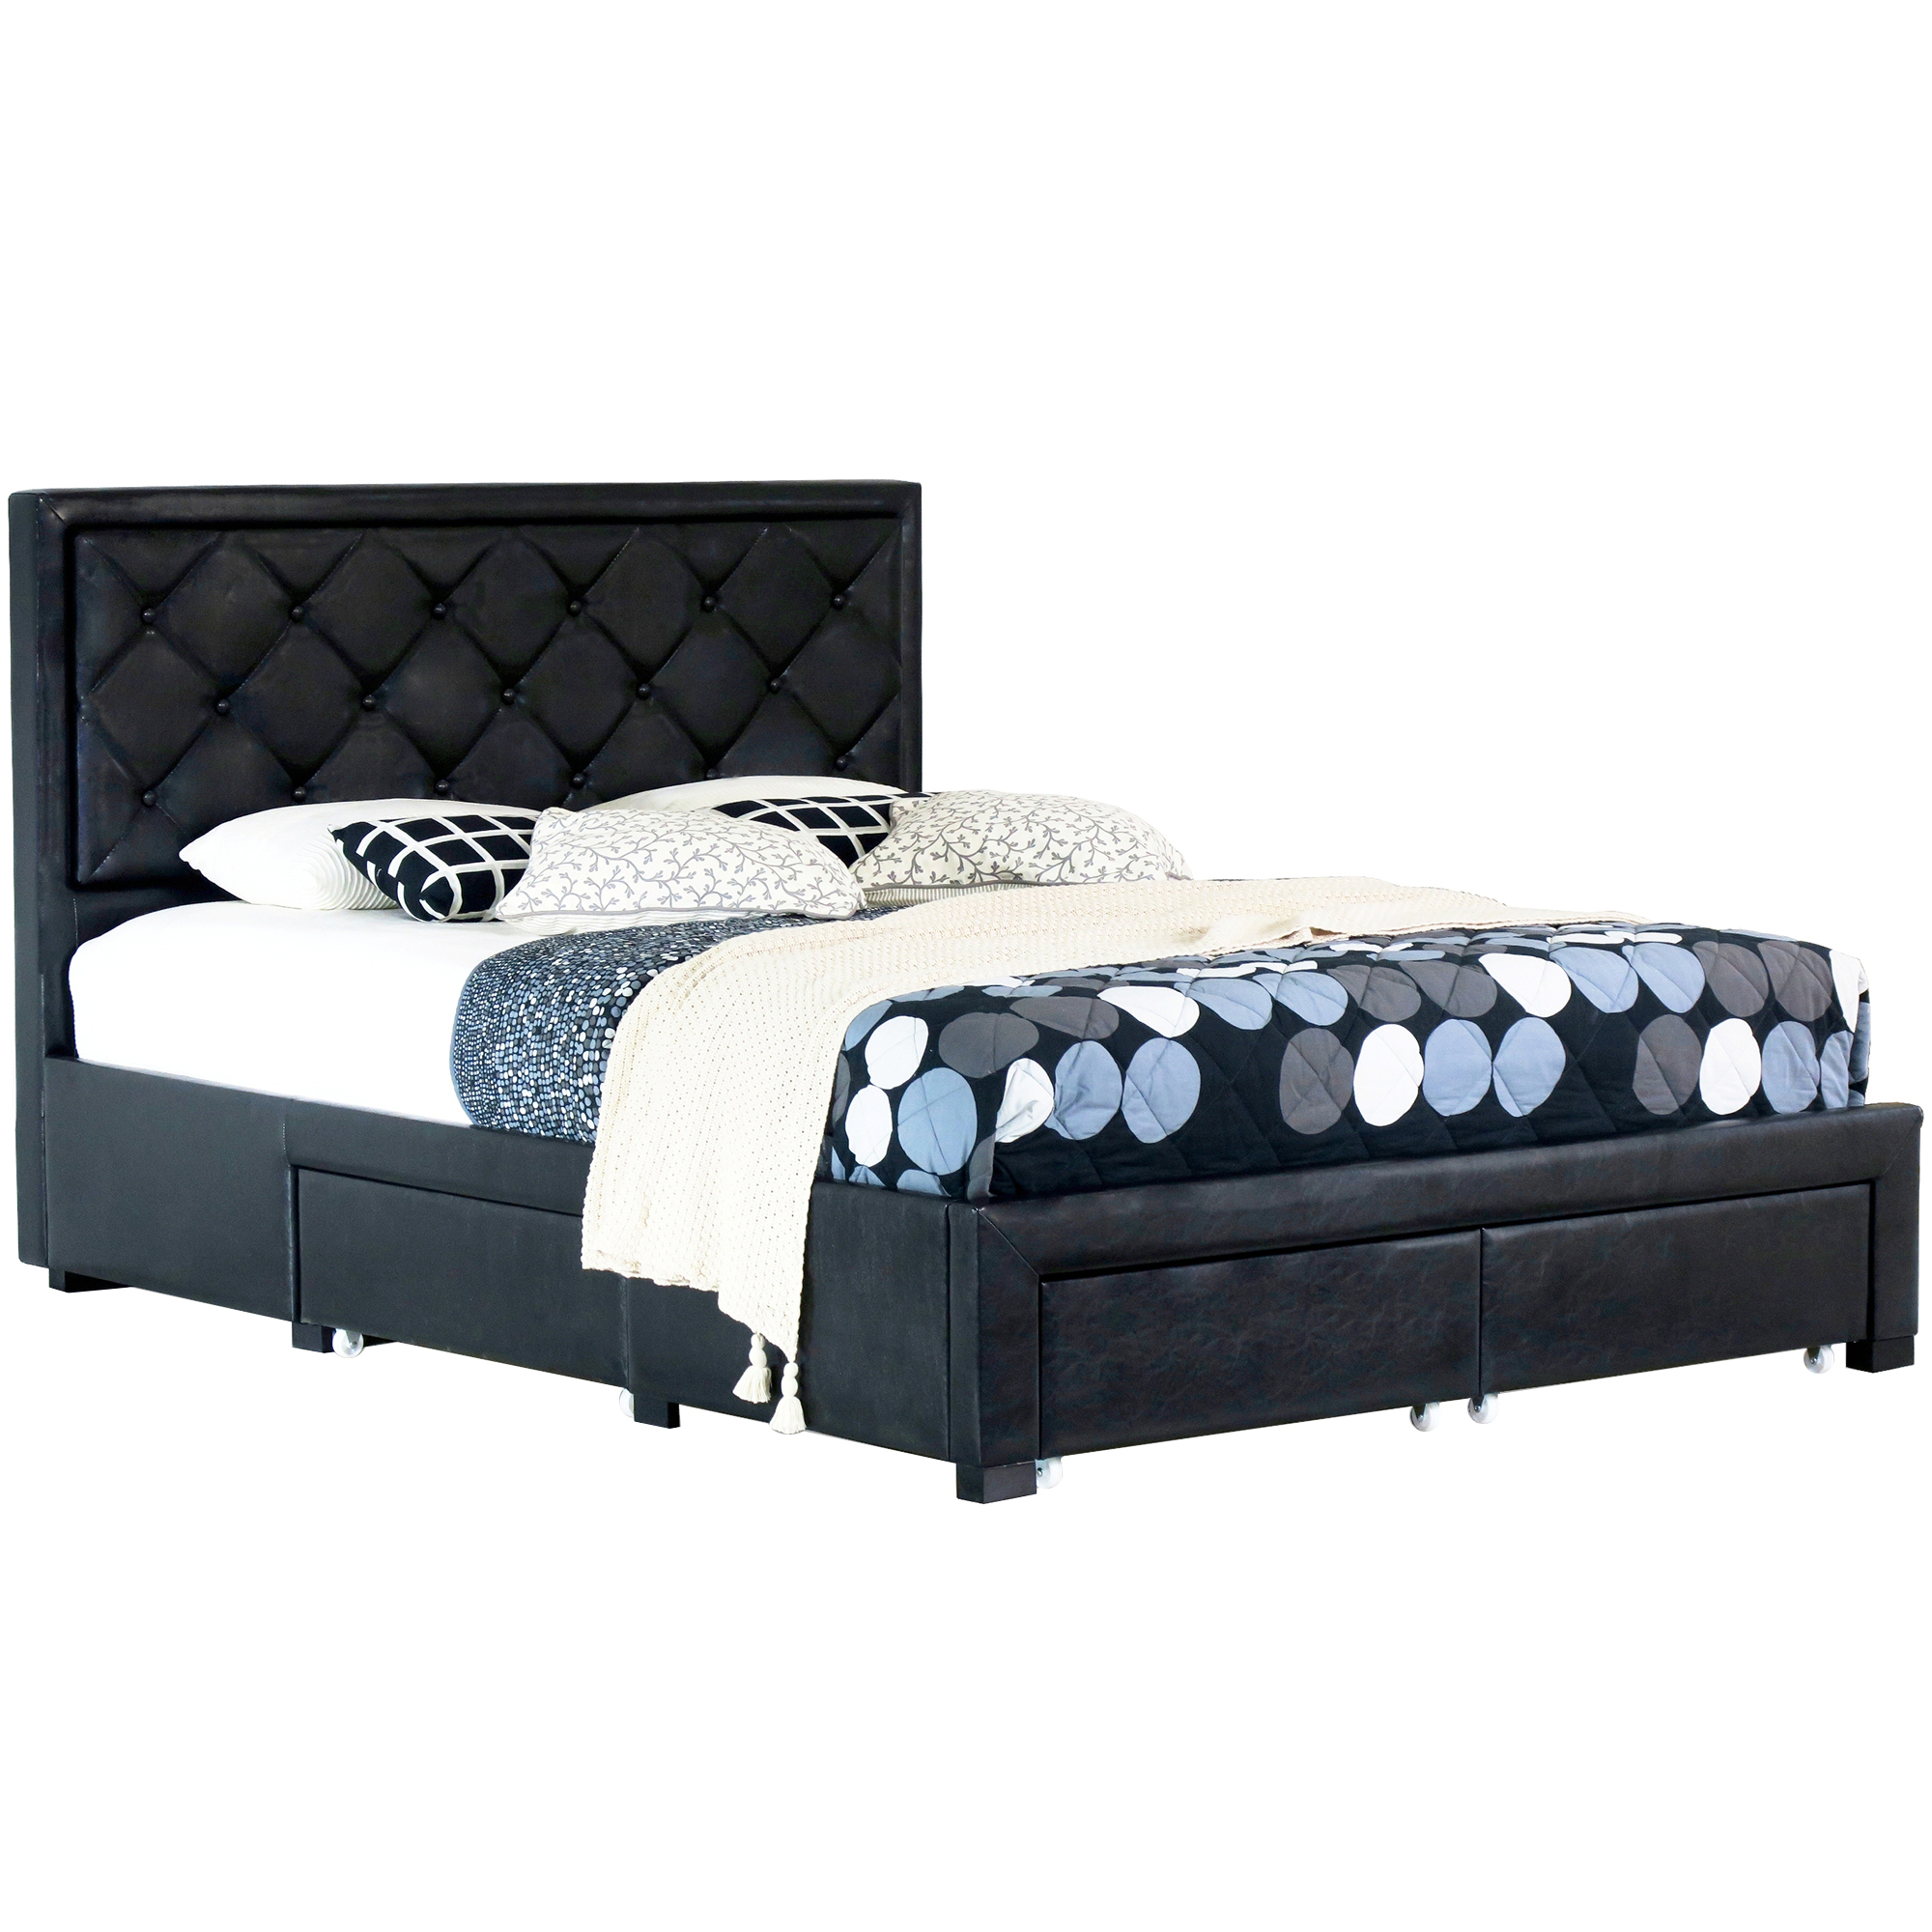 Faux Leather Bed Frame With Storage, Bed Frames Leather